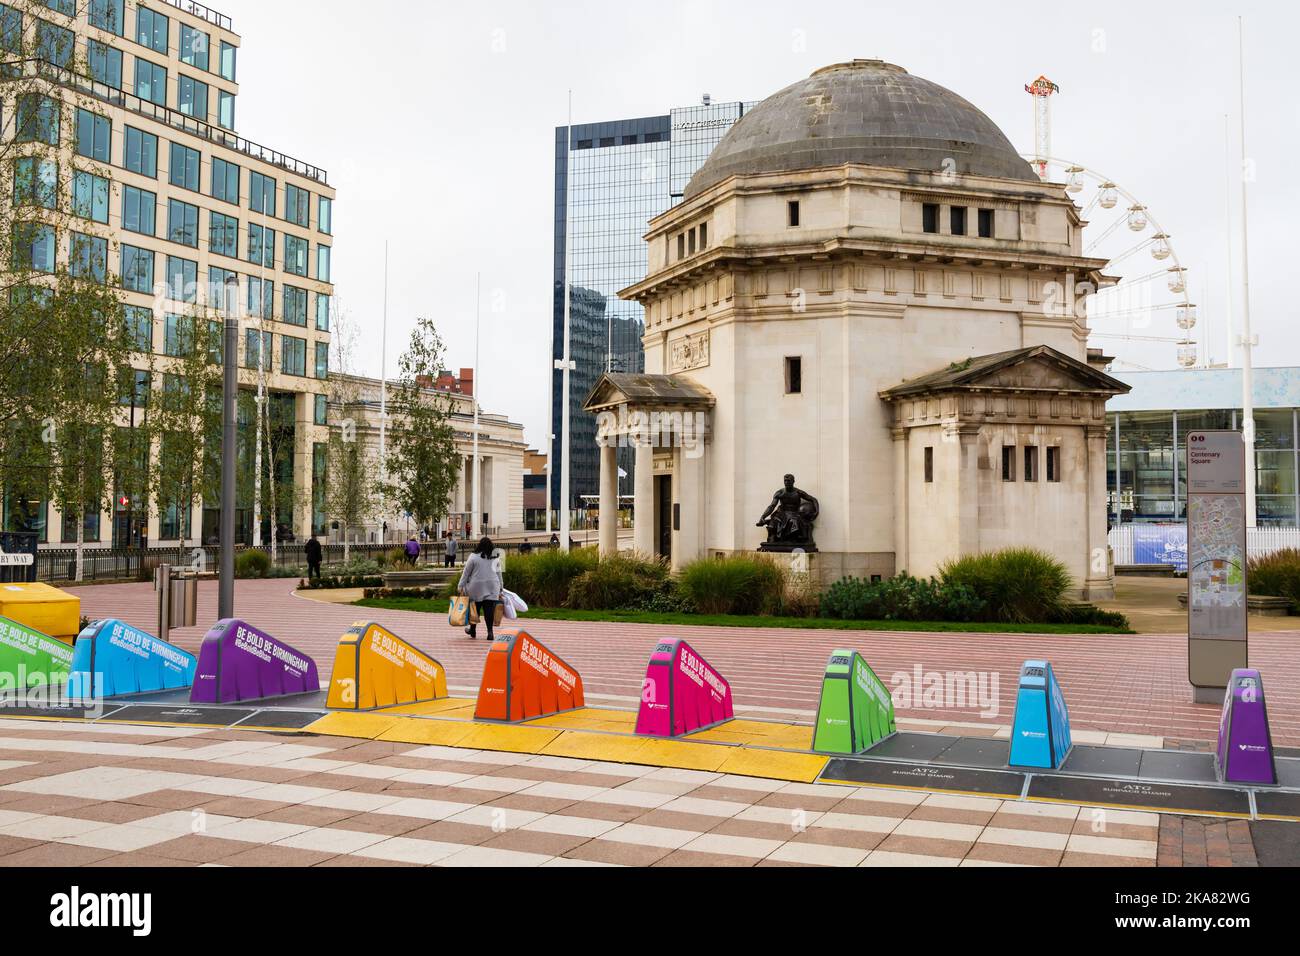 rainbow coloured anti terrorist vehicle ramps with the Hall of Memory memorial to WW1 First world War soldiers, sailors and airmen. Centenary Square, Stock Photo